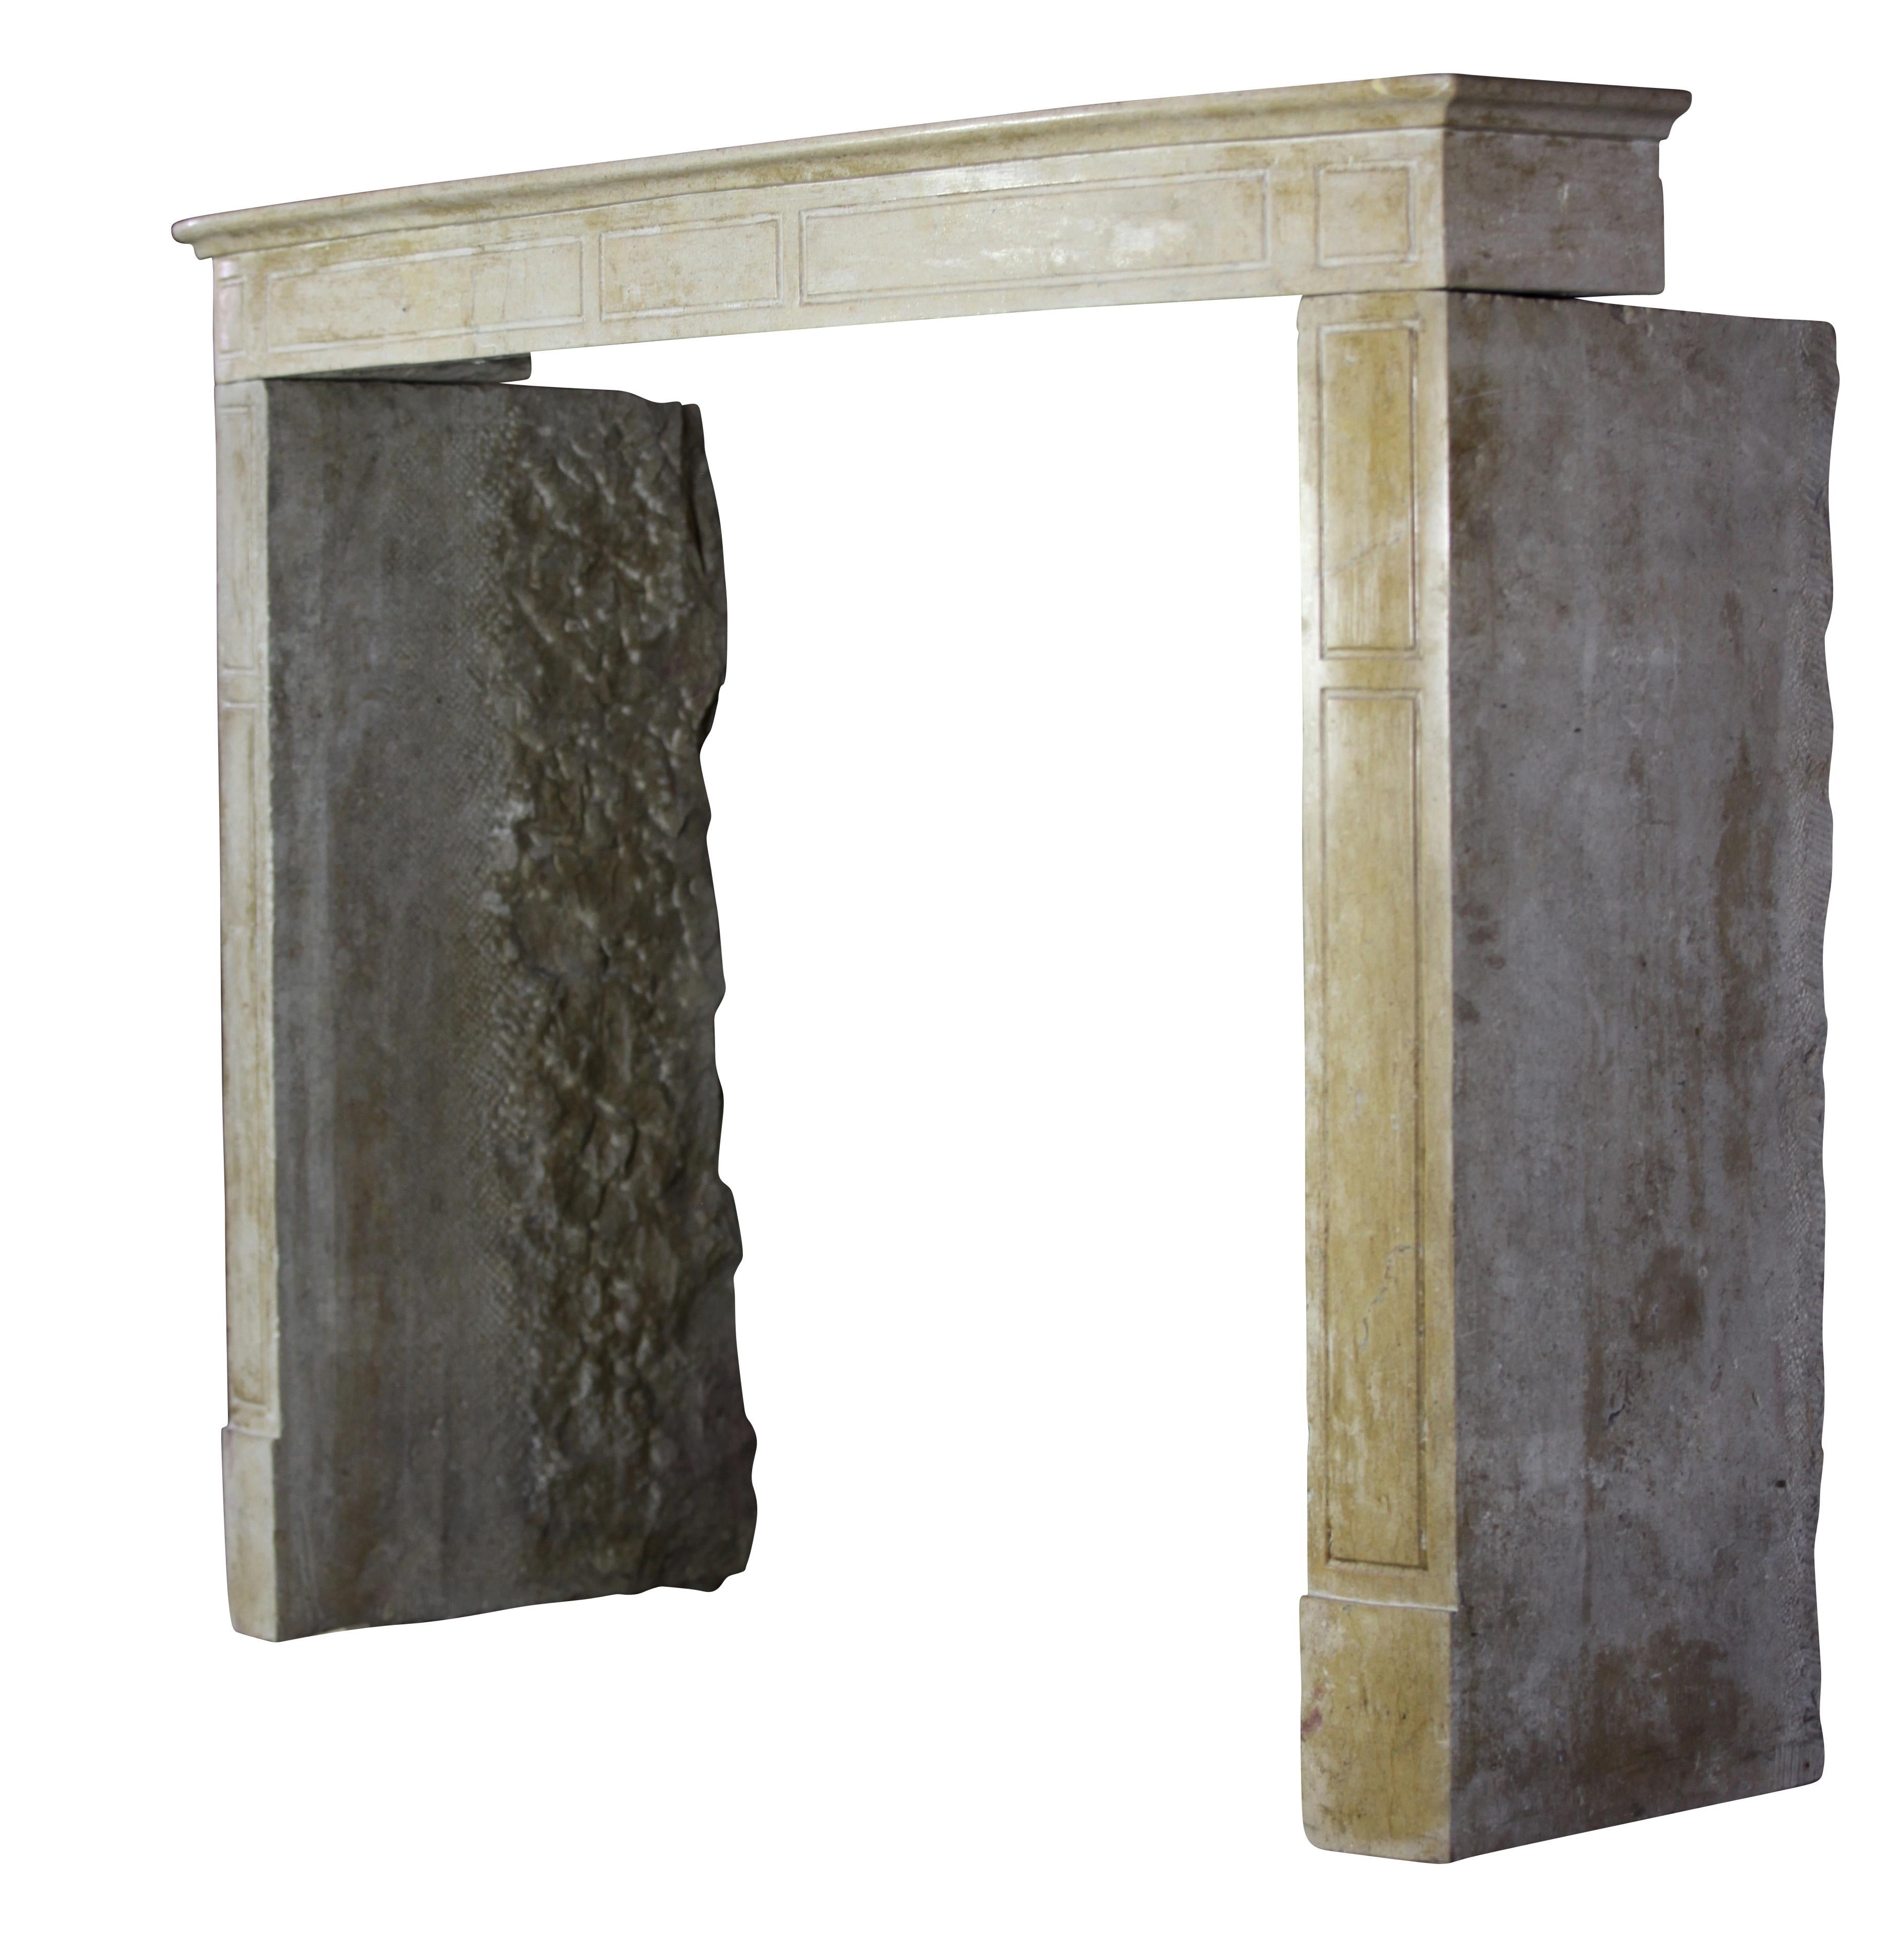 Straight antique Burgundy hard stone/marble chimney piece from the 19th century. The fronton of this original antique fireplace has a nice projection in the room and the jambs are straight. The honey color blends with the rest of the color pallet in